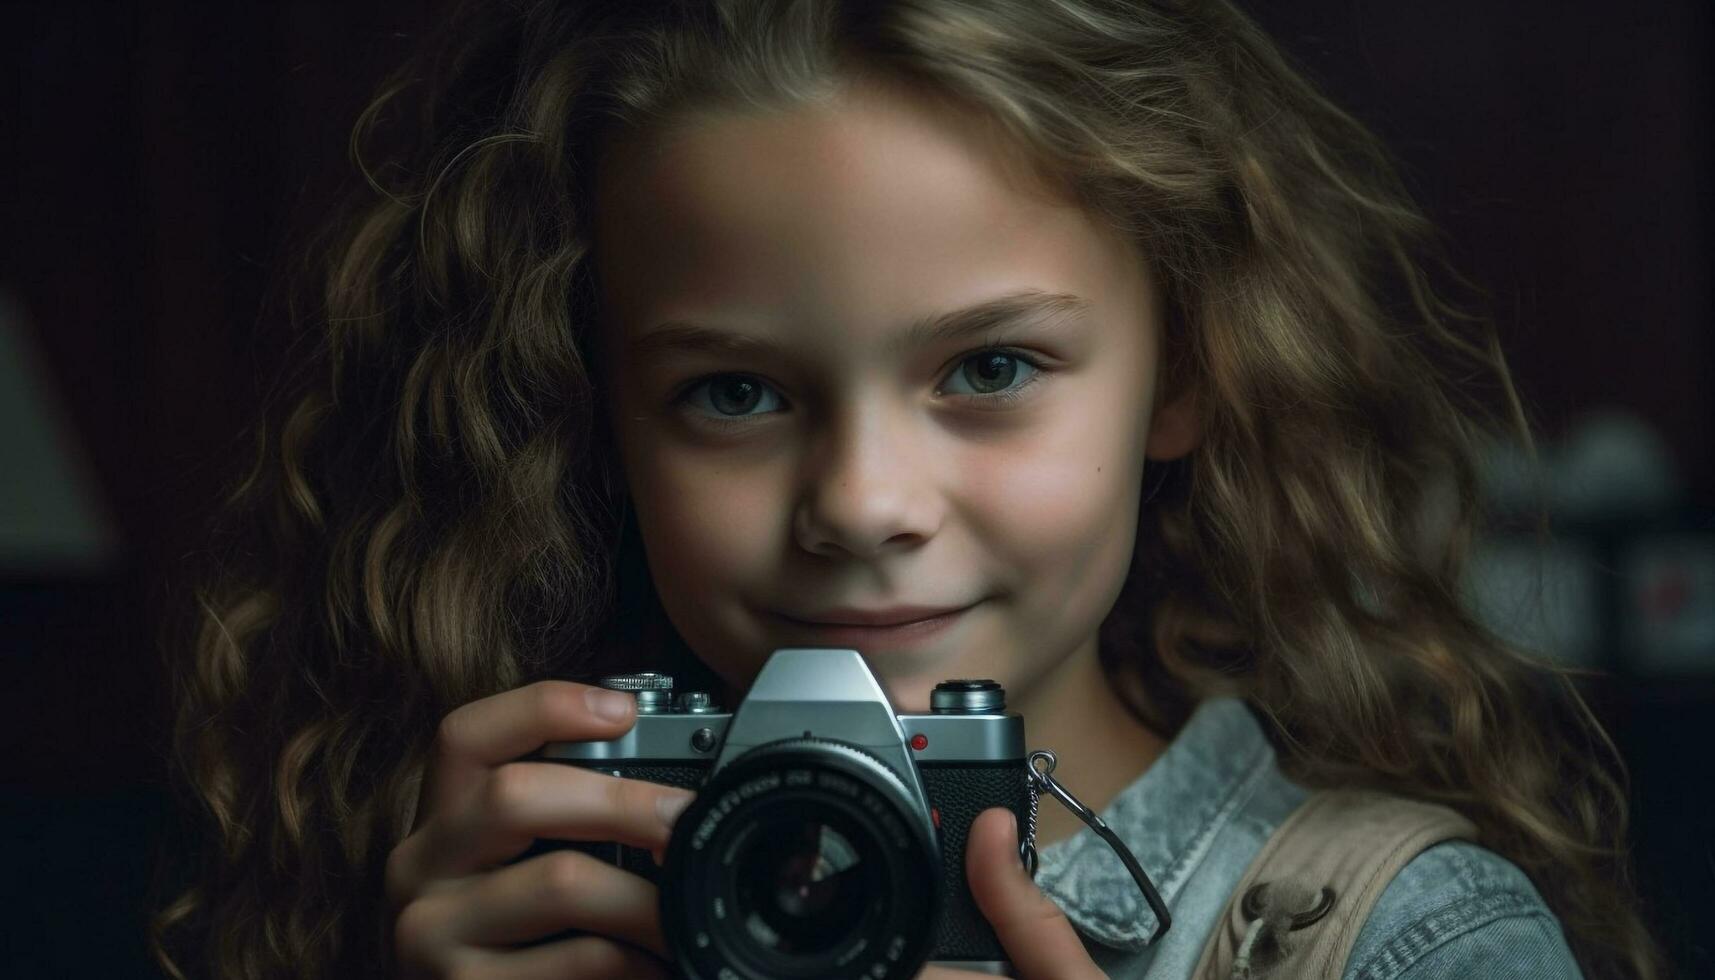 Cute Caucasian girl smiling, holding camera, looking at photographer outdoors generated by AI photo